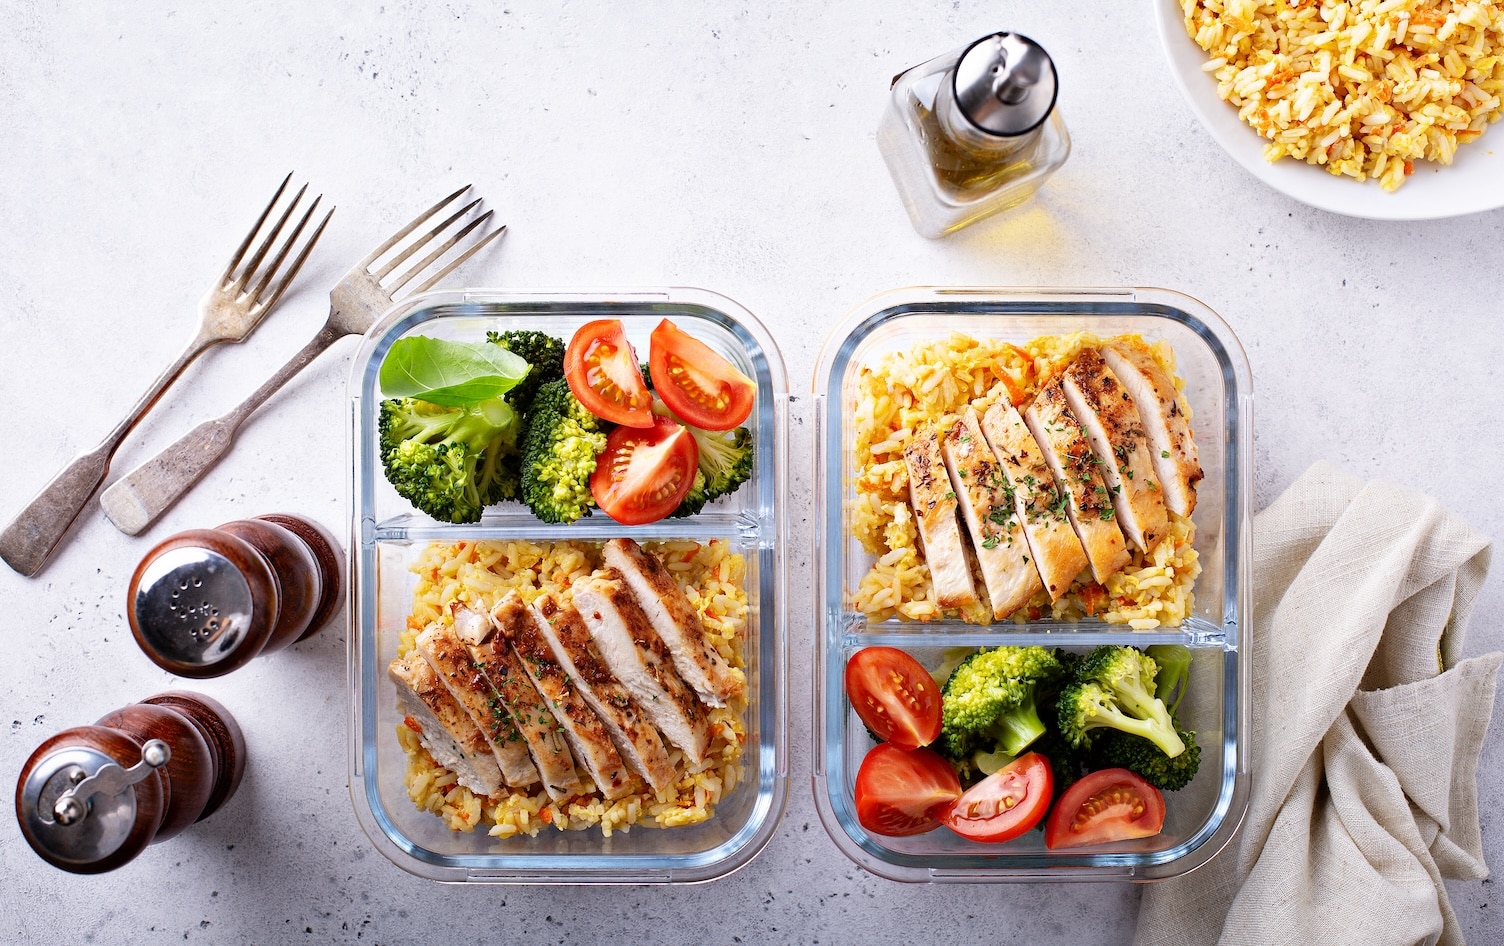 6 Easy Meal Prep Ideas for Weight Loss | MyFitnessPal